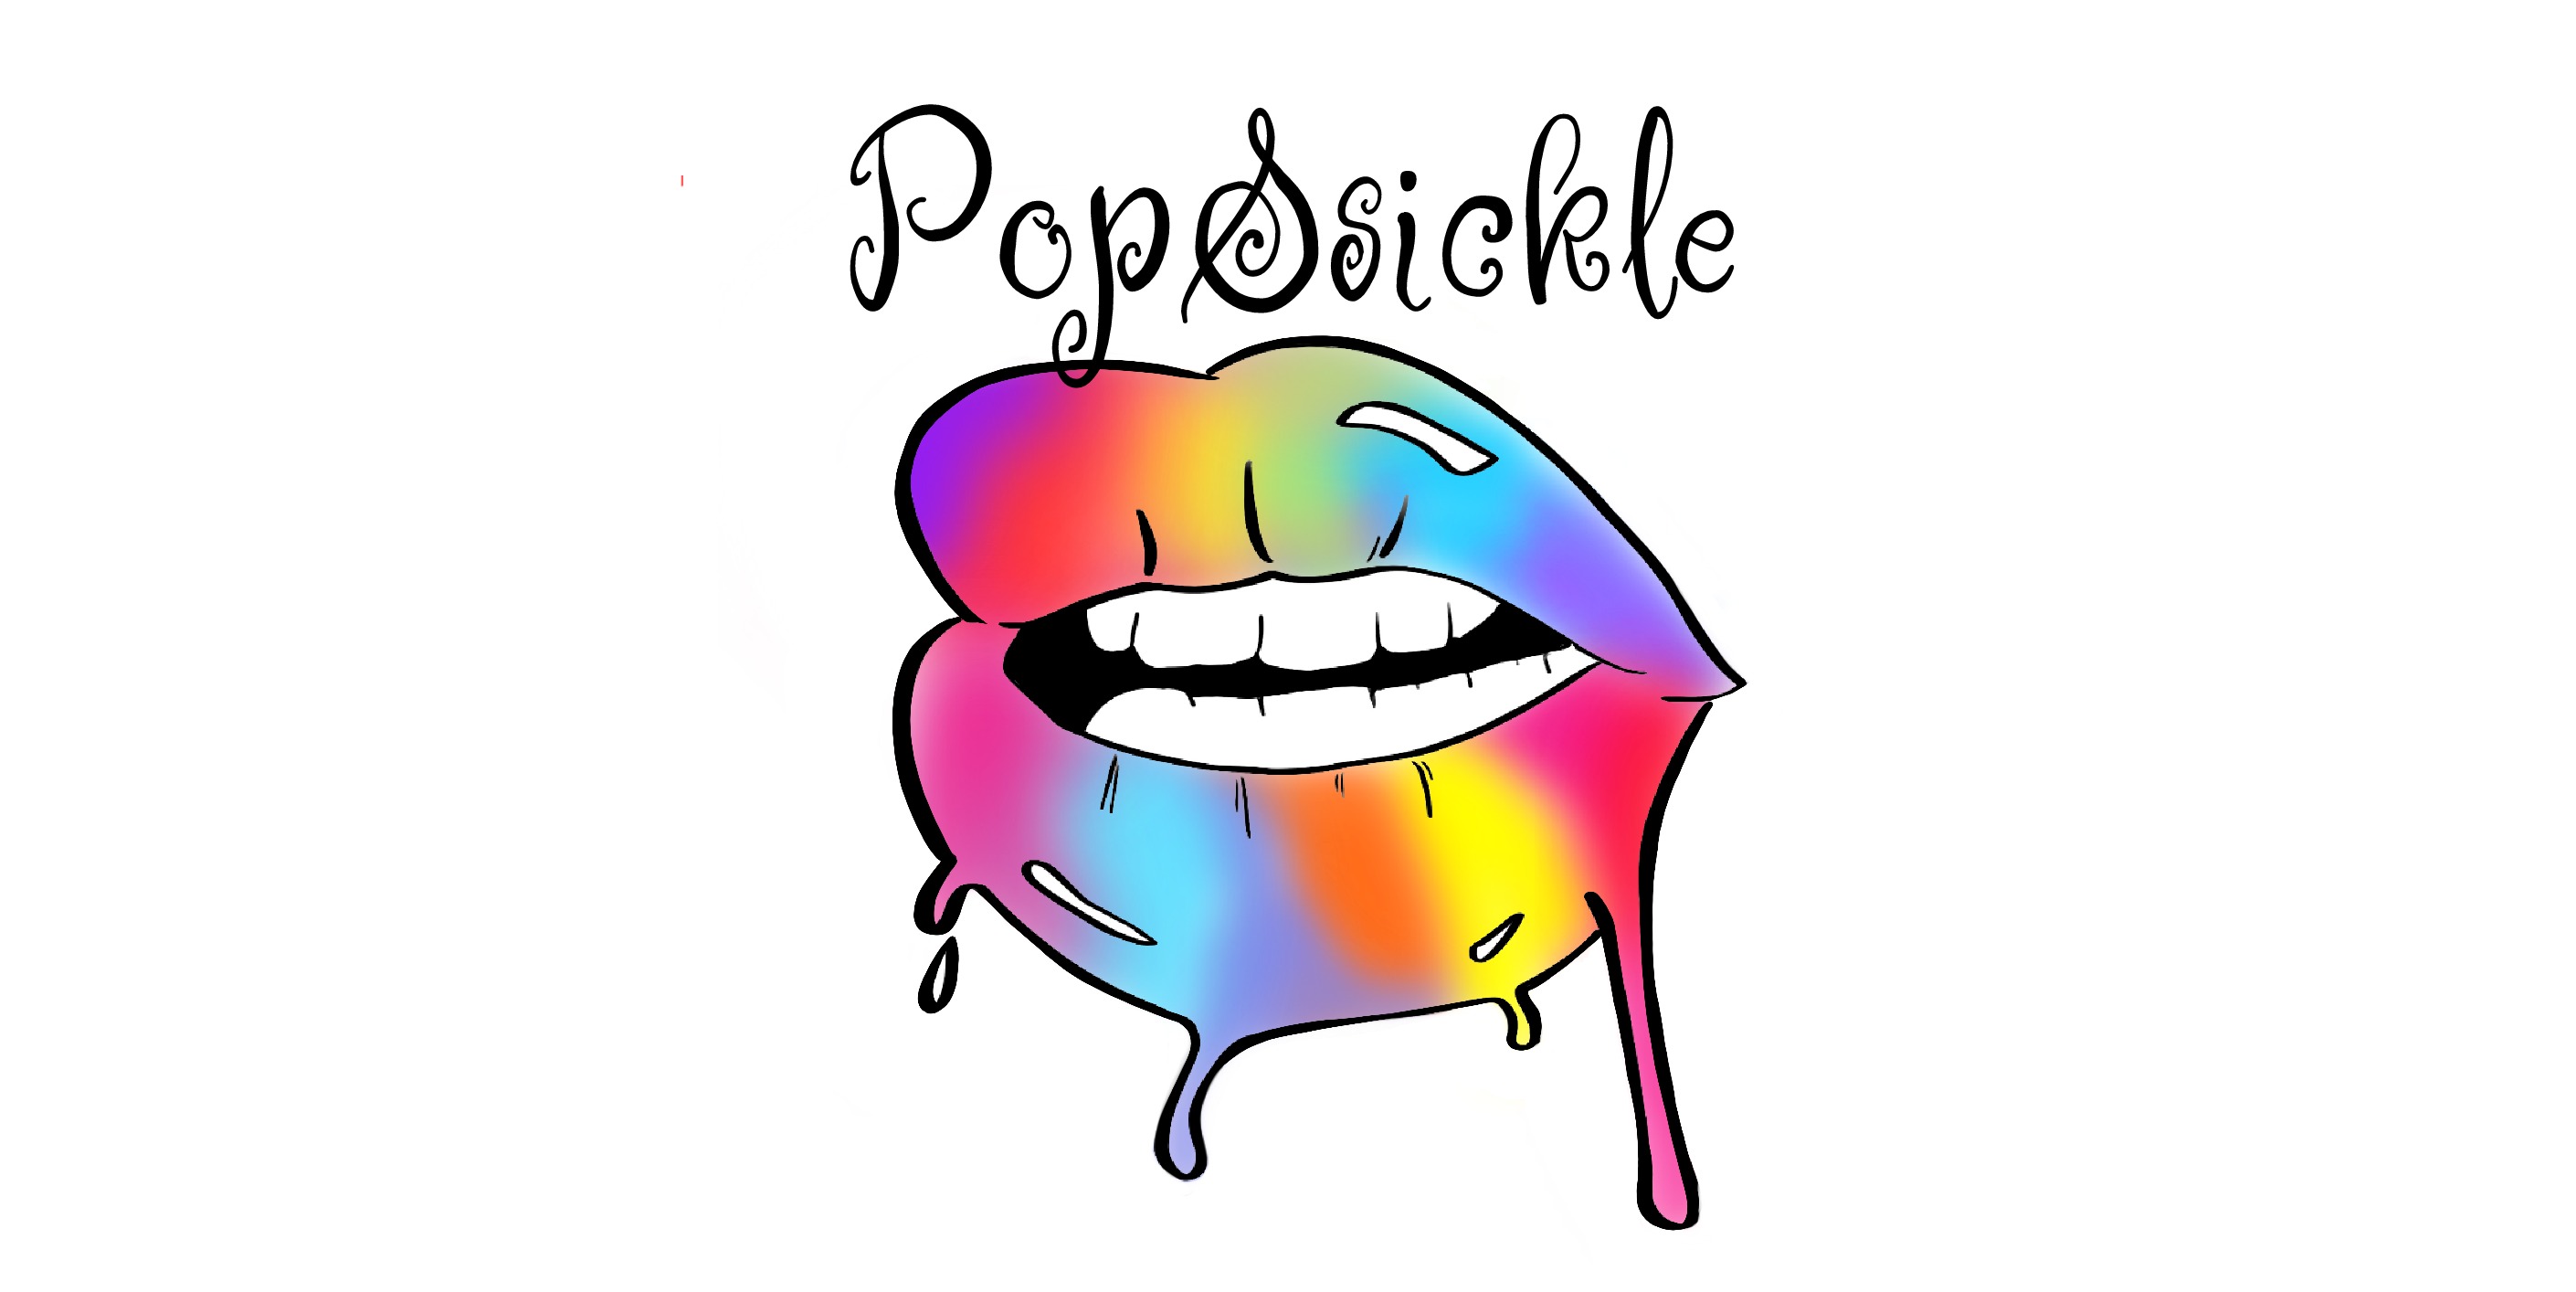 PopsSickle, Ajianette, age 15